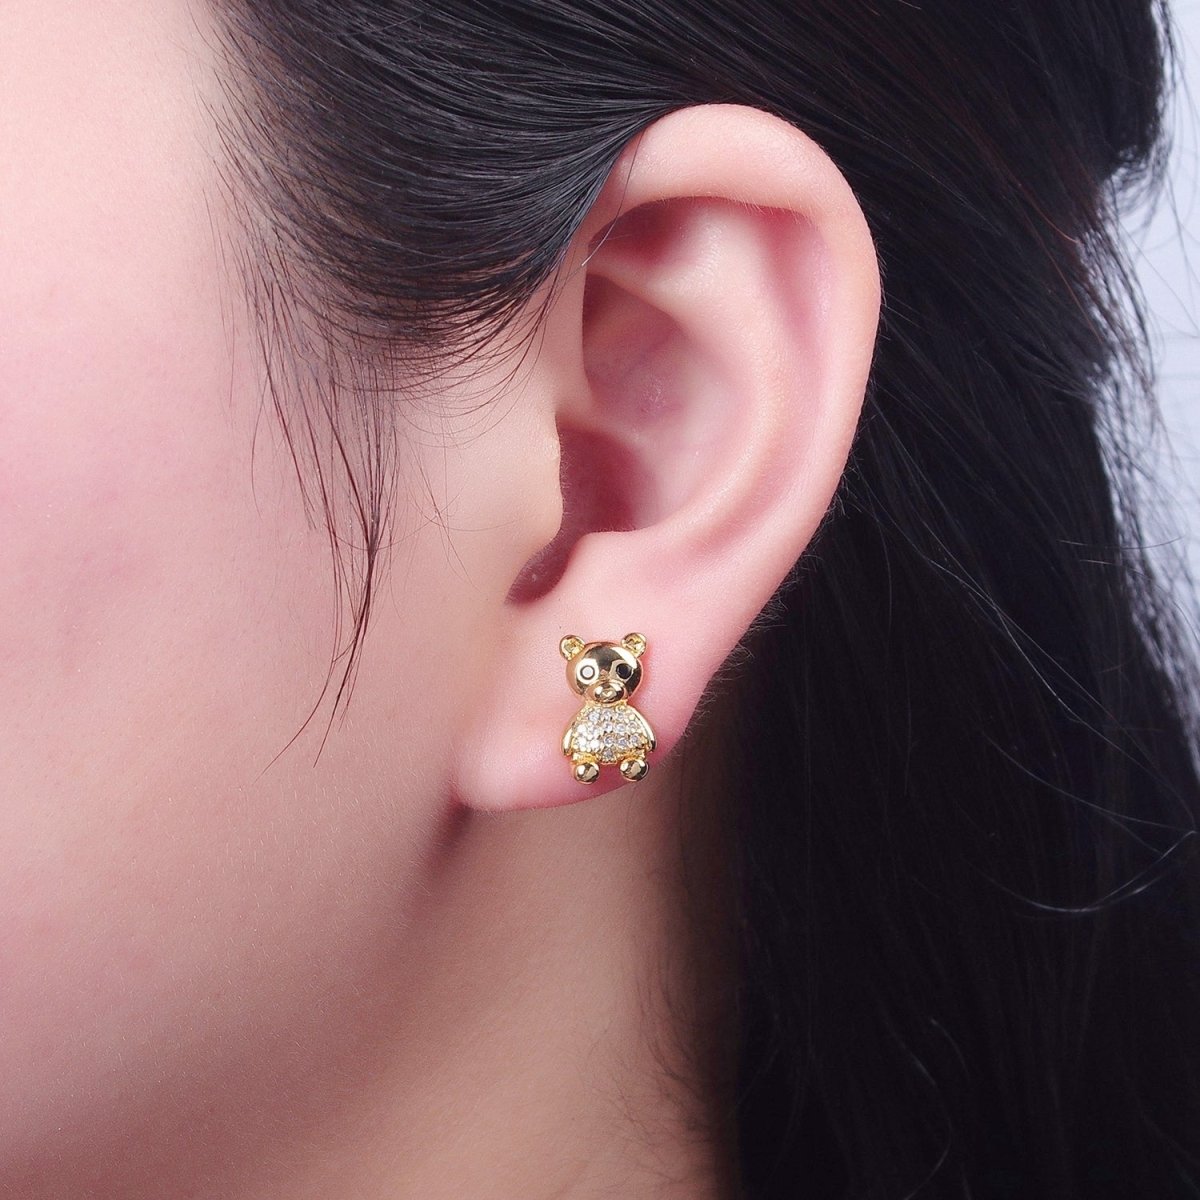 24K Gold Filled Micro Pave Gold Teddy Bear Stud Earrings P-320 - DLUXCA